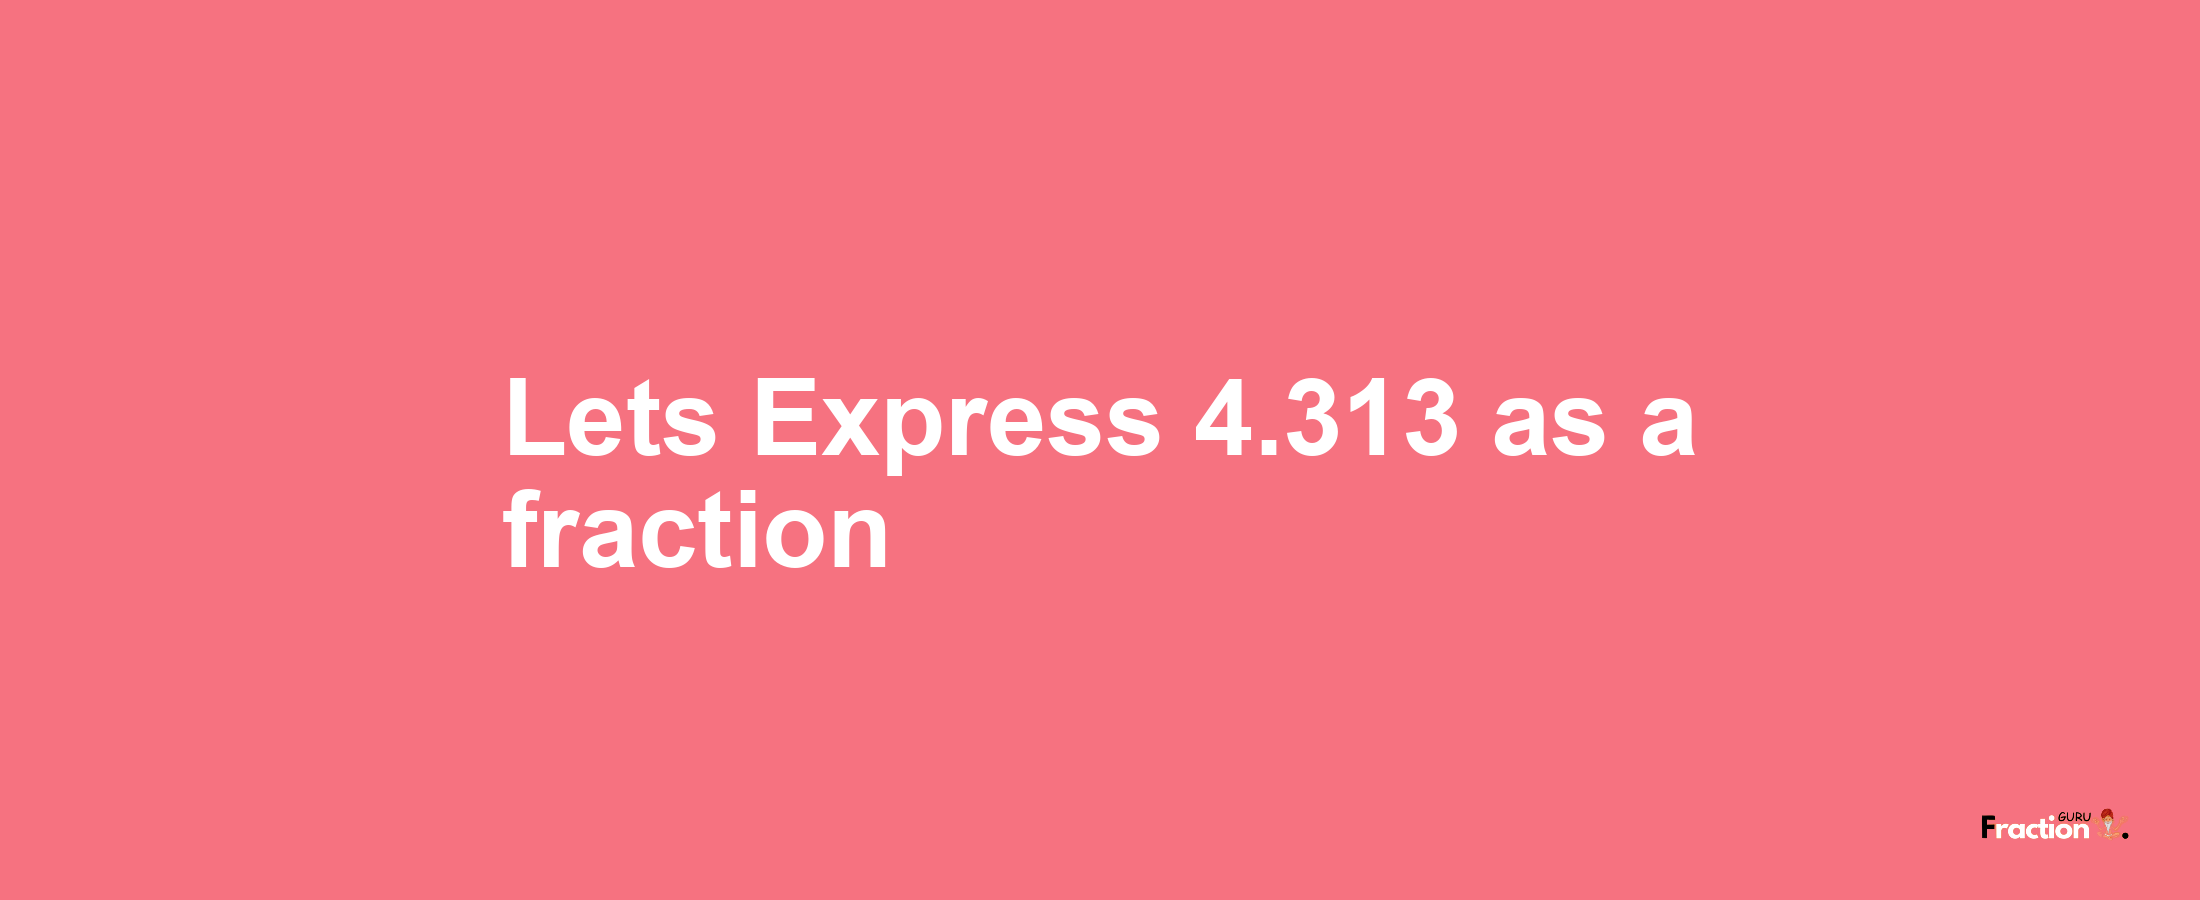 Lets Express 4.313 as afraction